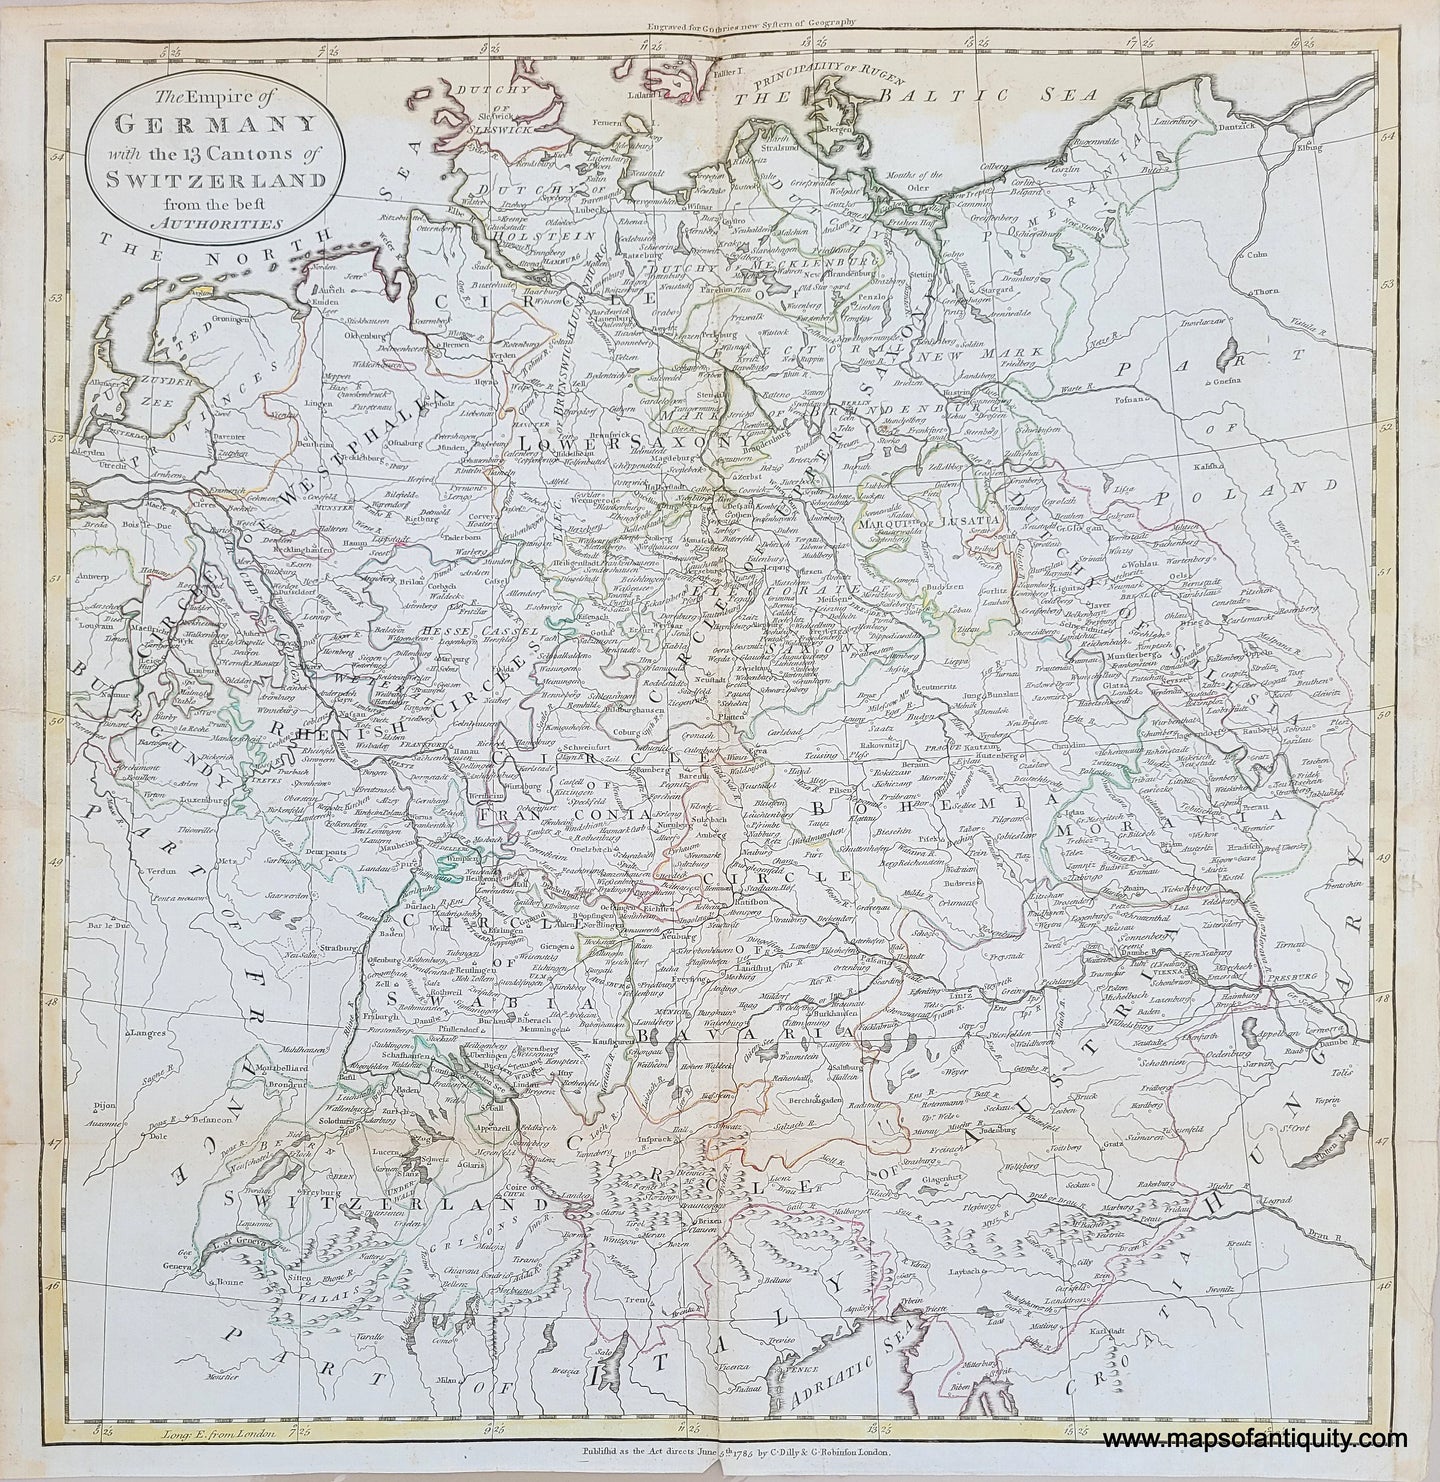 Genuine-Antique-Map-The-Empire-of-Germany-with-the-13-Cantons-of-Switzerland-from-the-best-Authorities-1785-Guthrie-Dilly---Robinson-Maps-Of-Antiquity